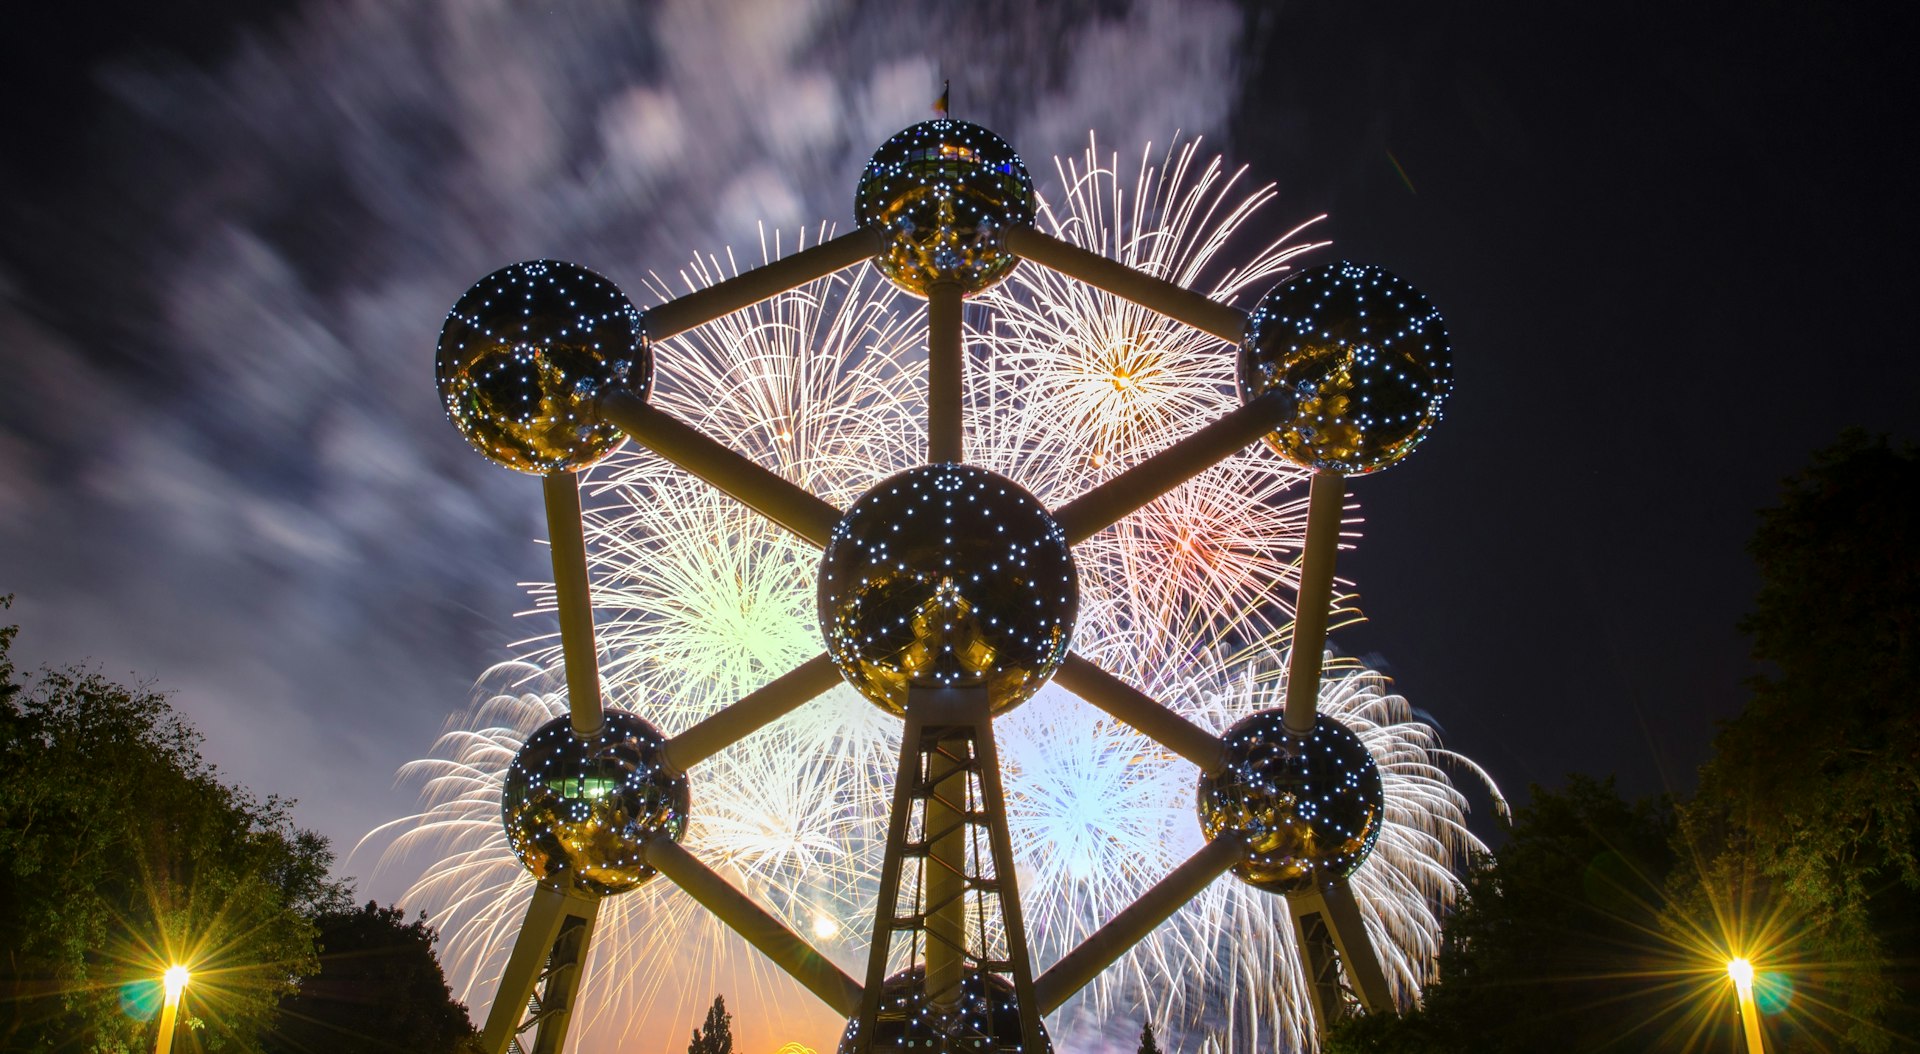 A large metal sculpture in the shape of an atom with six big silver balls connected to a larger, central sphere by metal rods is lit by both a series of lights arranged in similar atomic patterns on the surface of each sphere and by a bright fireworks display behind the Atomium against a deep cobalt sky